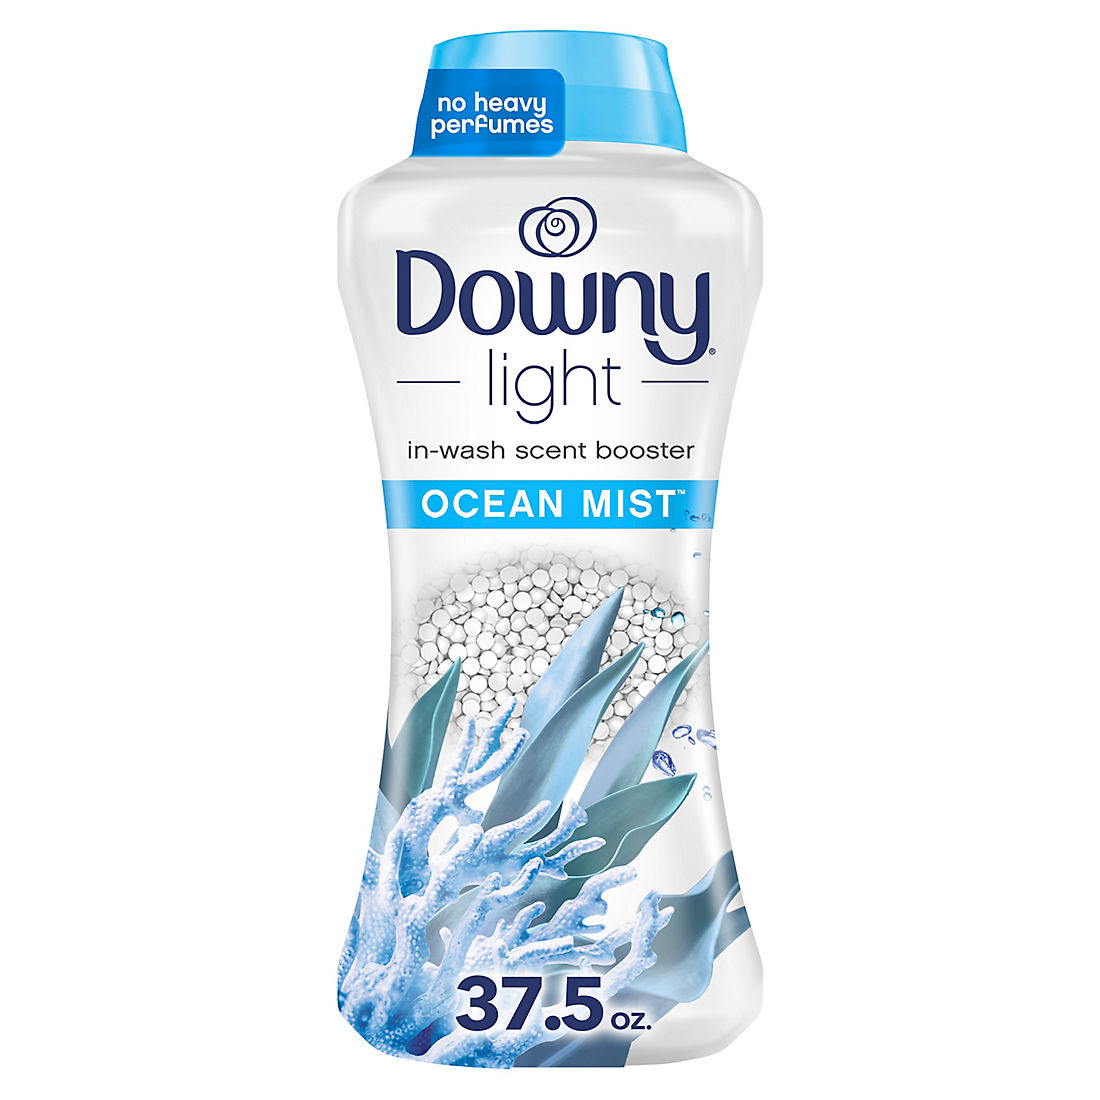 Downy Light Laundry Scent Booster Beads for Washer, 37.5 Oz.